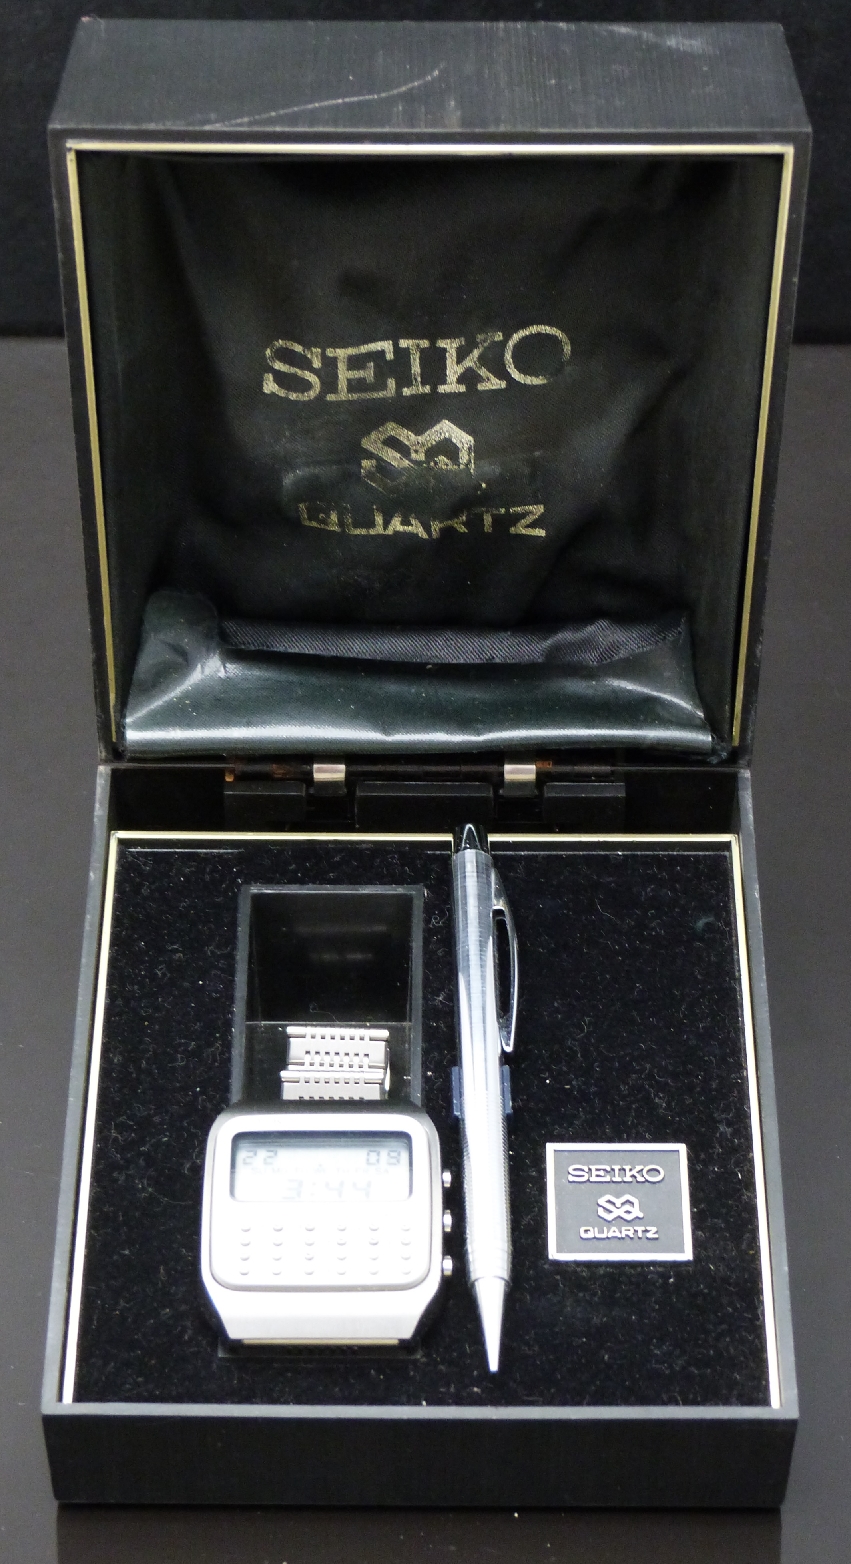 Seiko Calculator gentleman's wristwatch ref. C153-5007 with digital display and stainless steel - Image 4 of 4